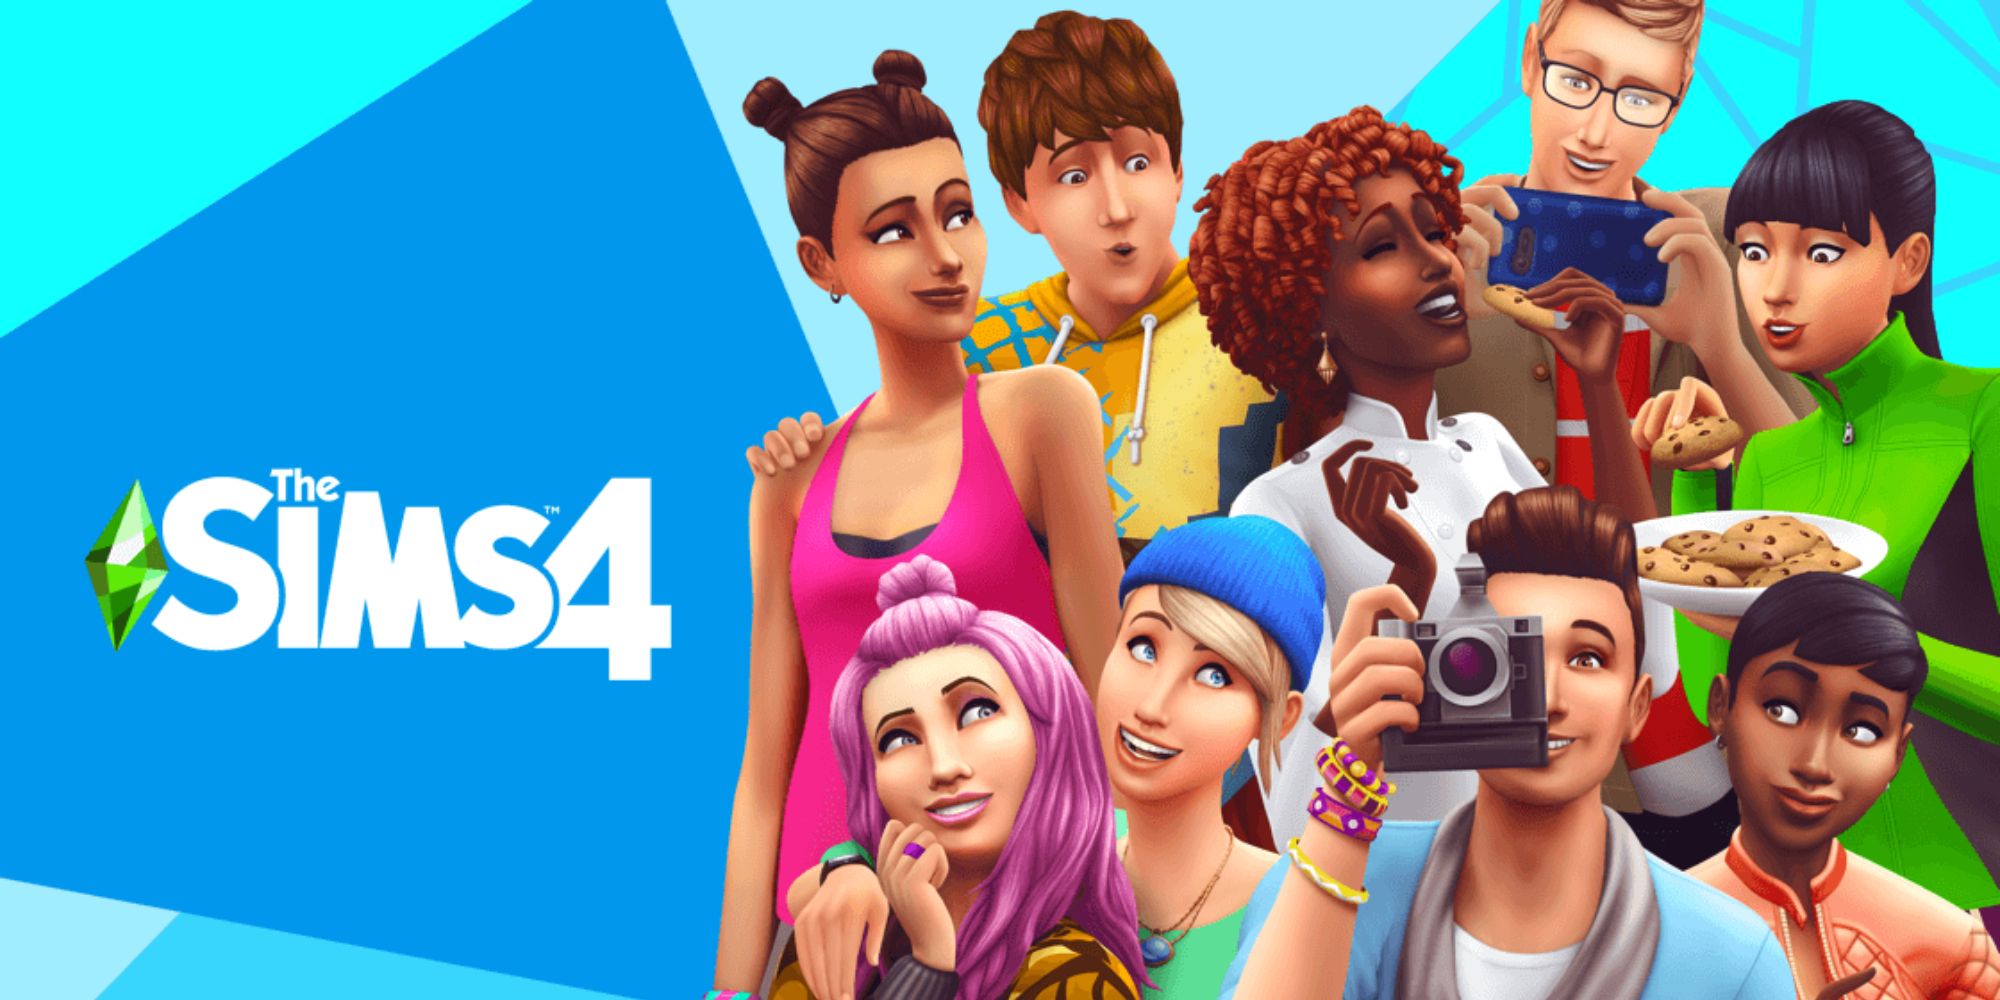 Fictional Currencies a cover image for The Sims 4 with various Sims on the right holding a variety of items and posing with the game's logo against a blue background on the left